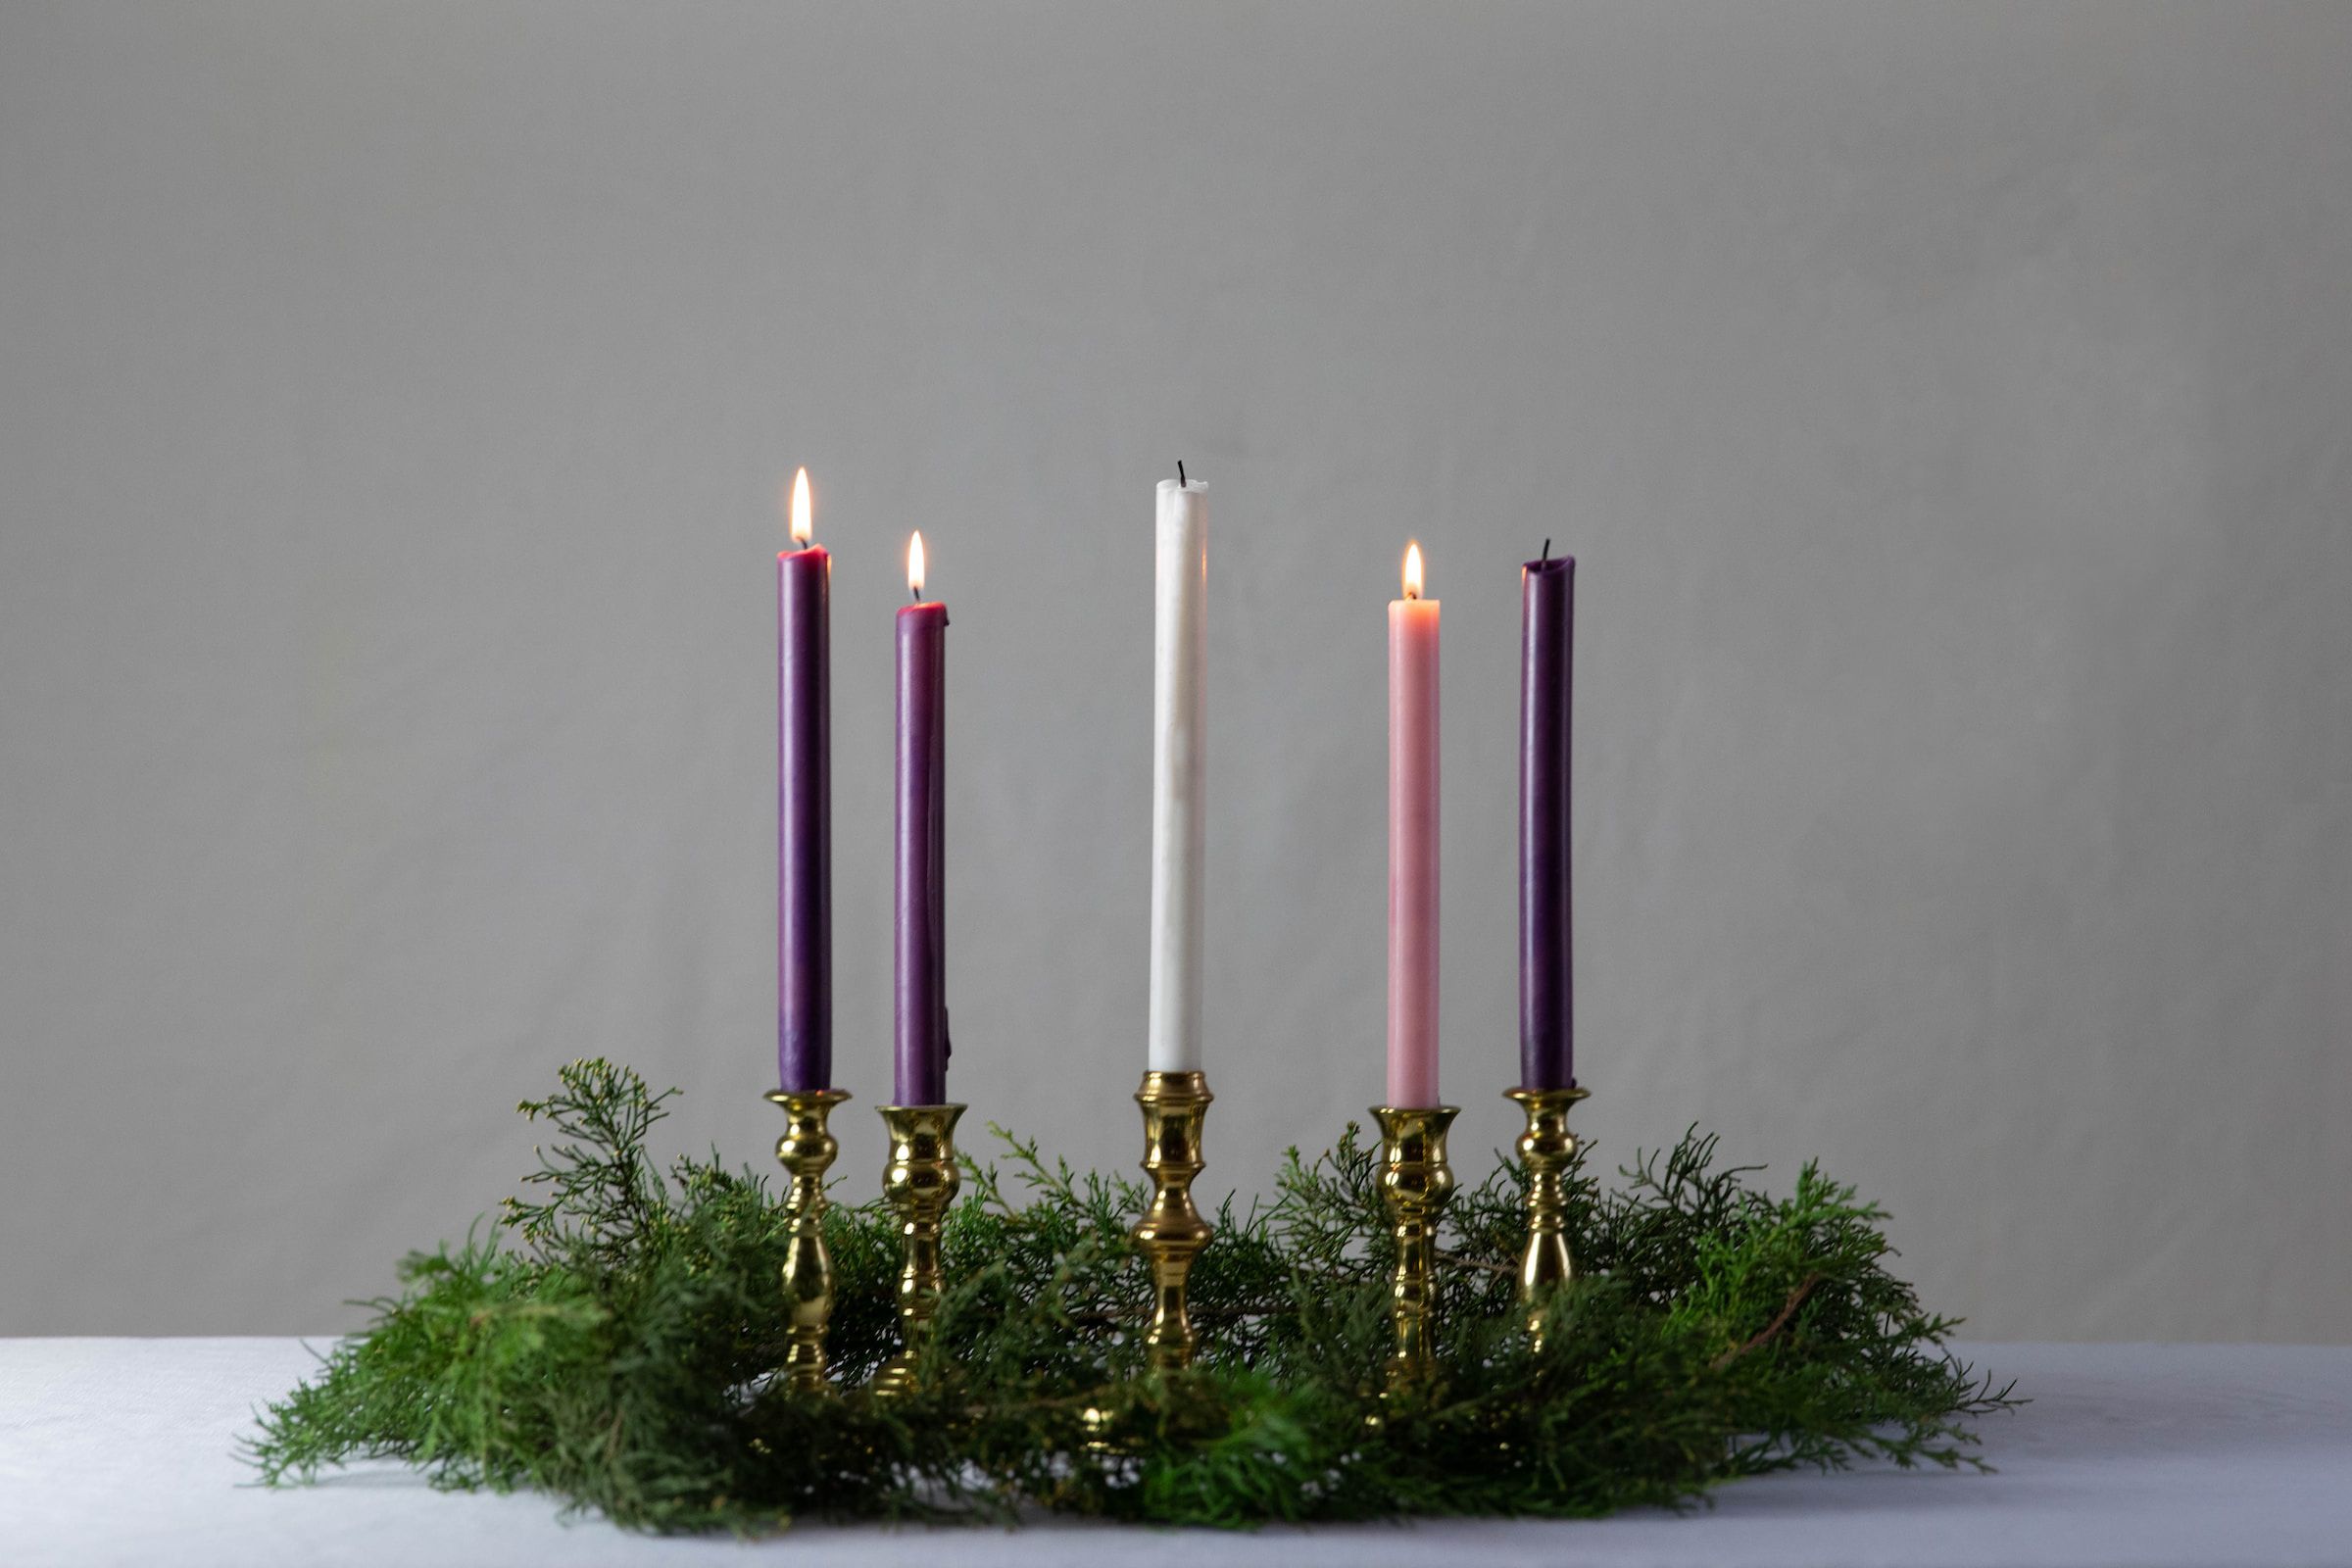 https://s7d9.scene7.com/is/image/LifeWayChristianResources/advent-candle-23?scl=1